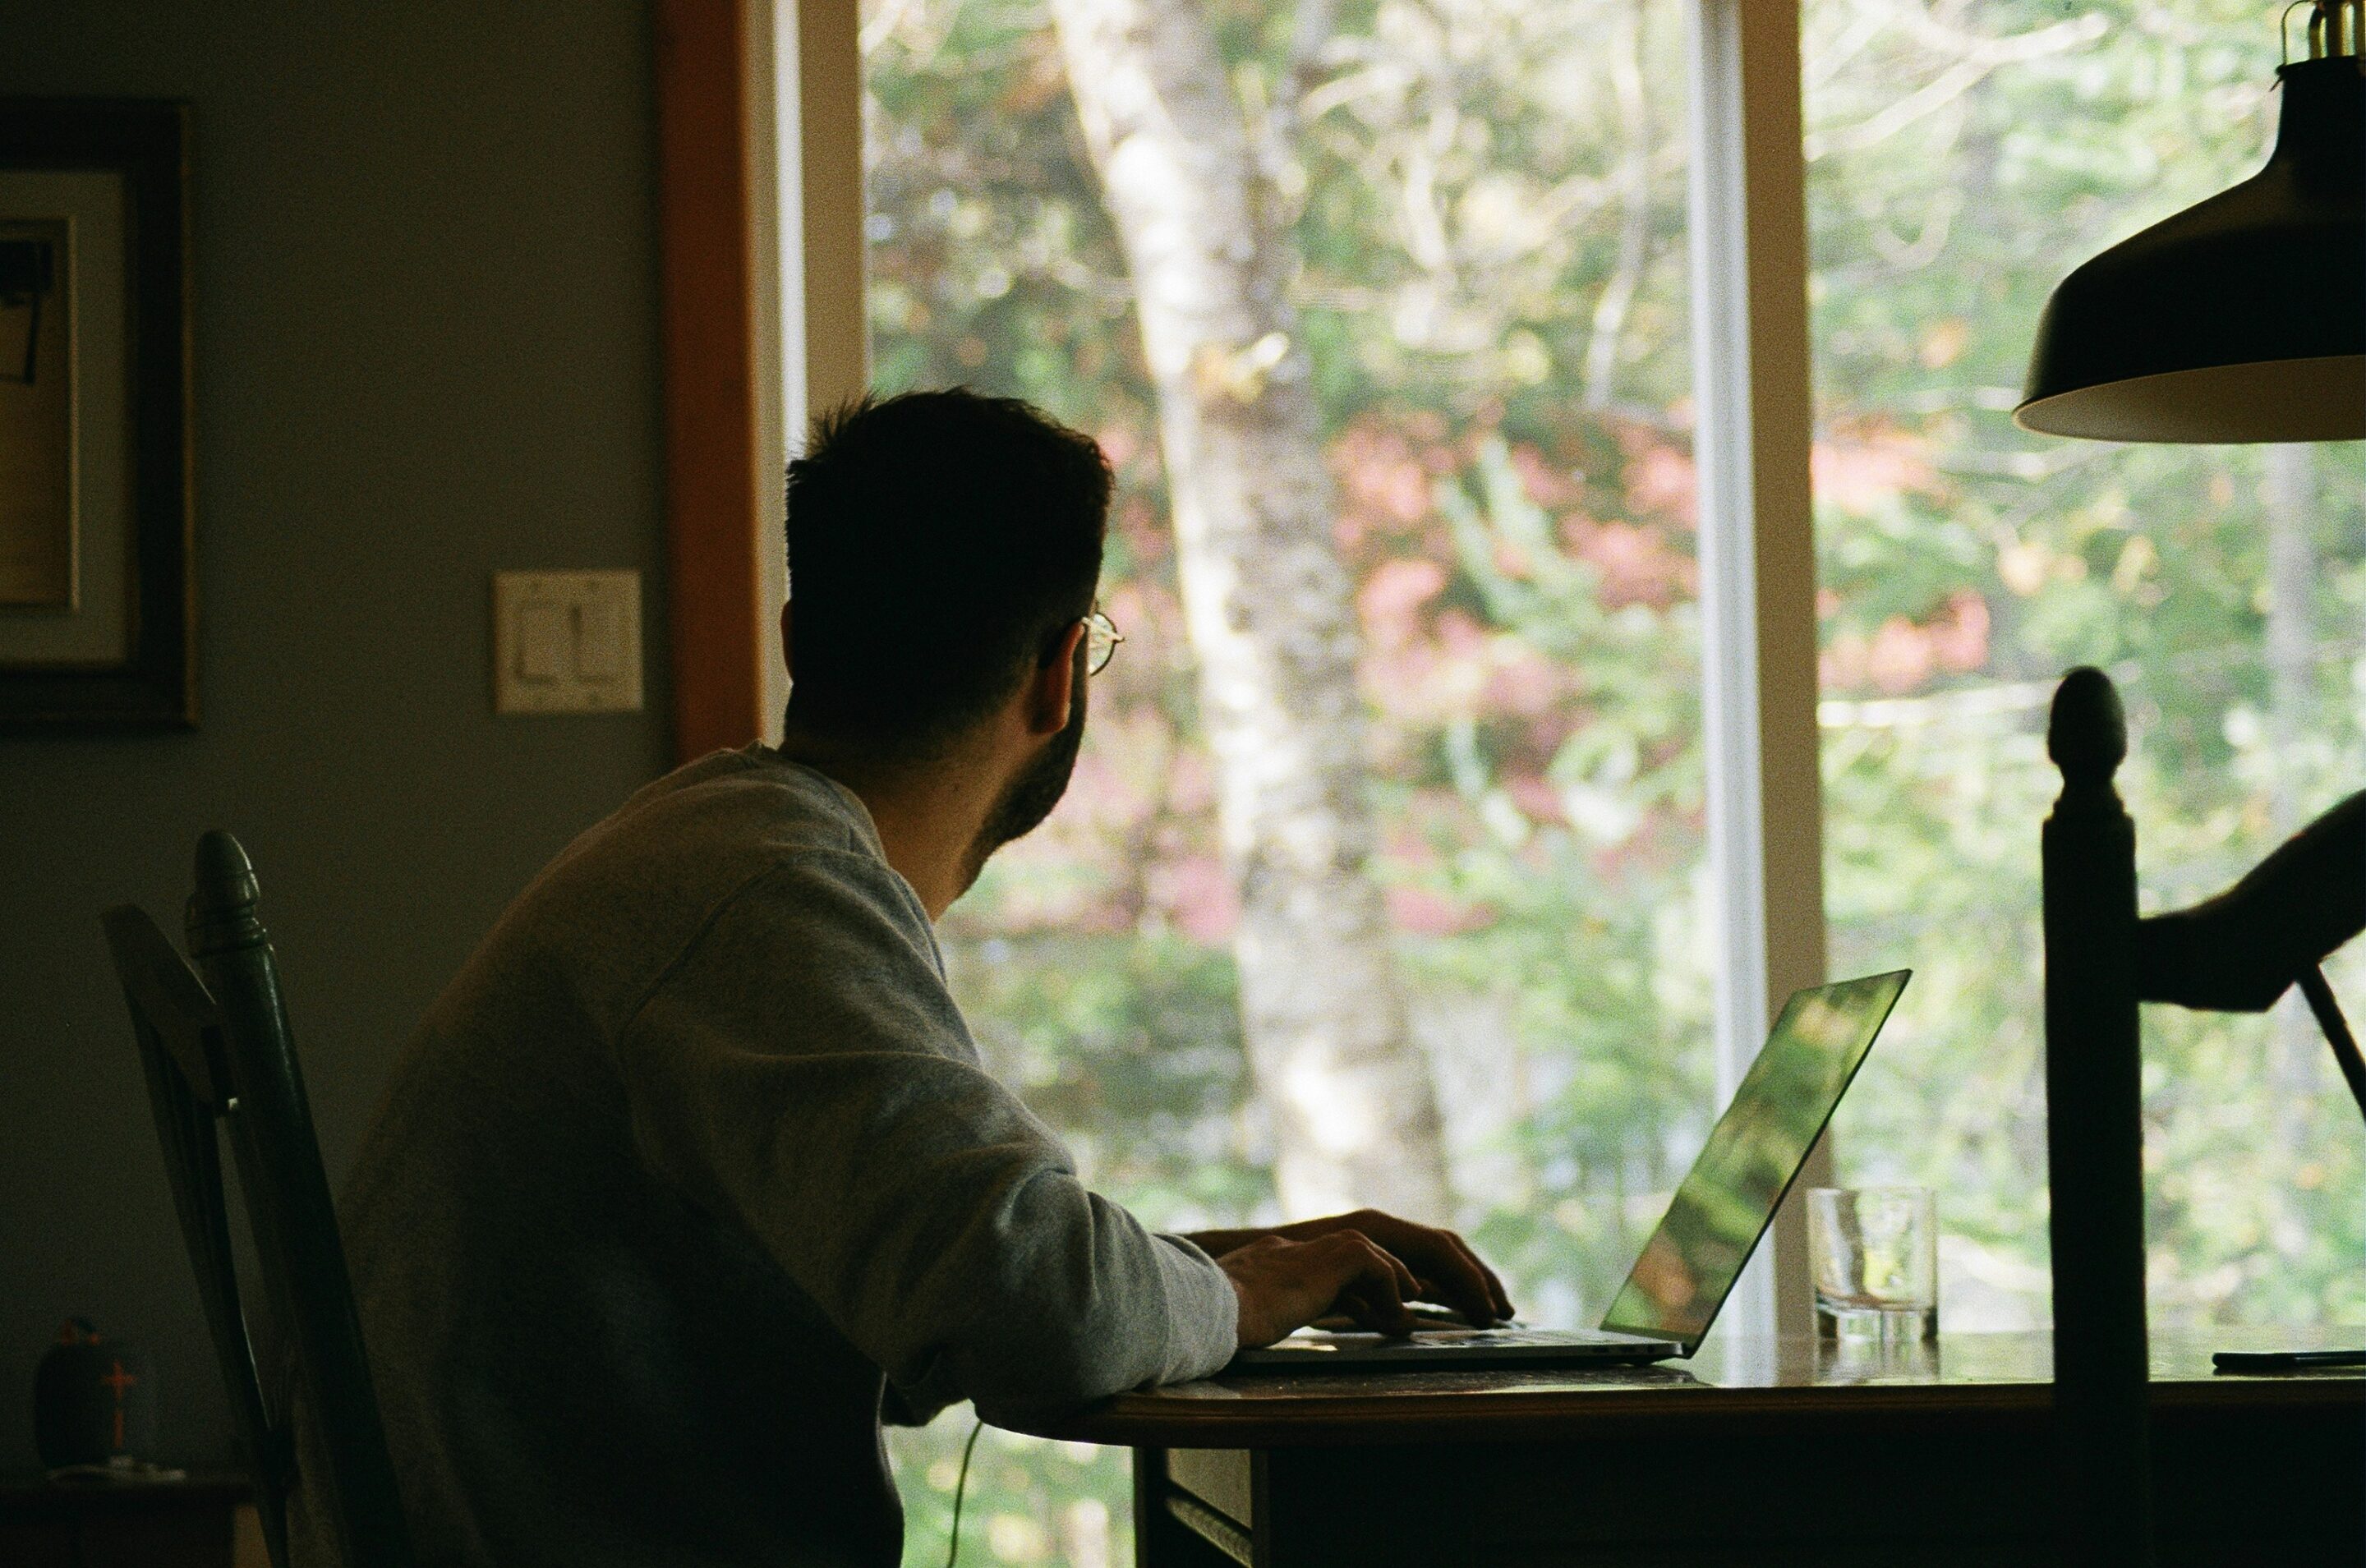 man on computer looking out window